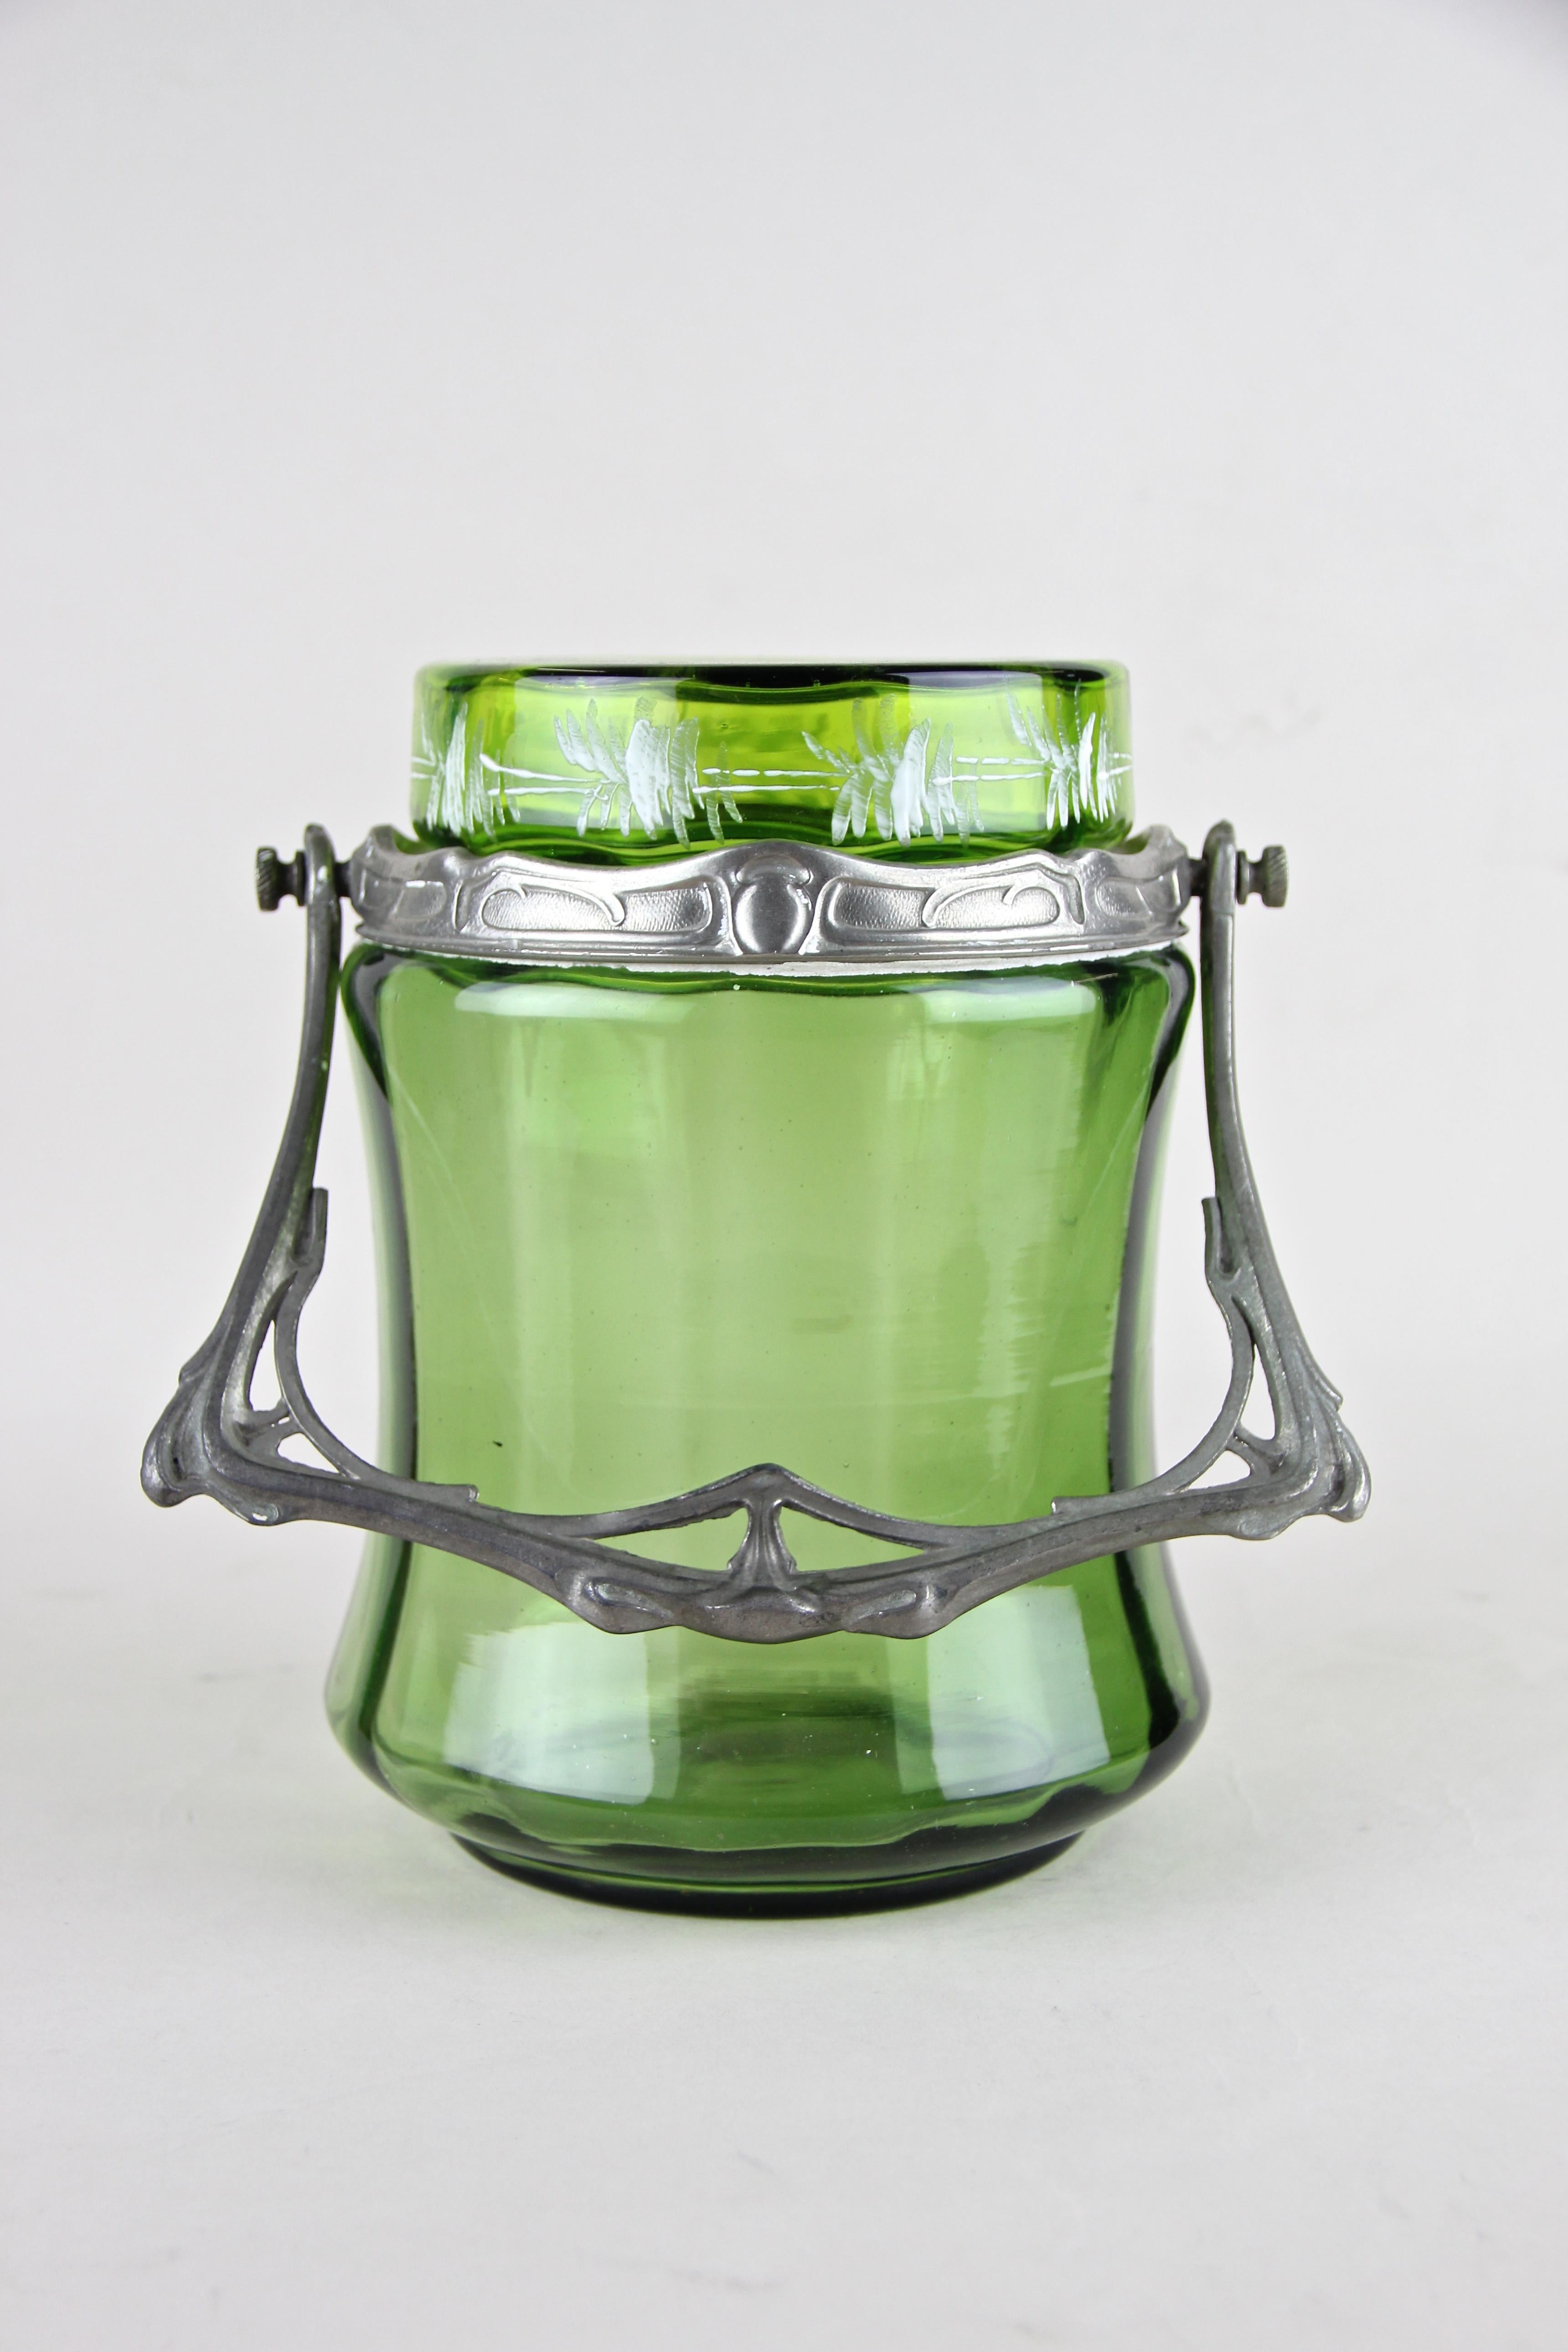 Lovely Bohemian glass jar with Lid from the beginning of the 20th century out of the Czech Republic. The beautiful shaped green glass jar comes with an artful, typically for the Art Nouveau era, designed tin mounting. A removable glass lid adorned